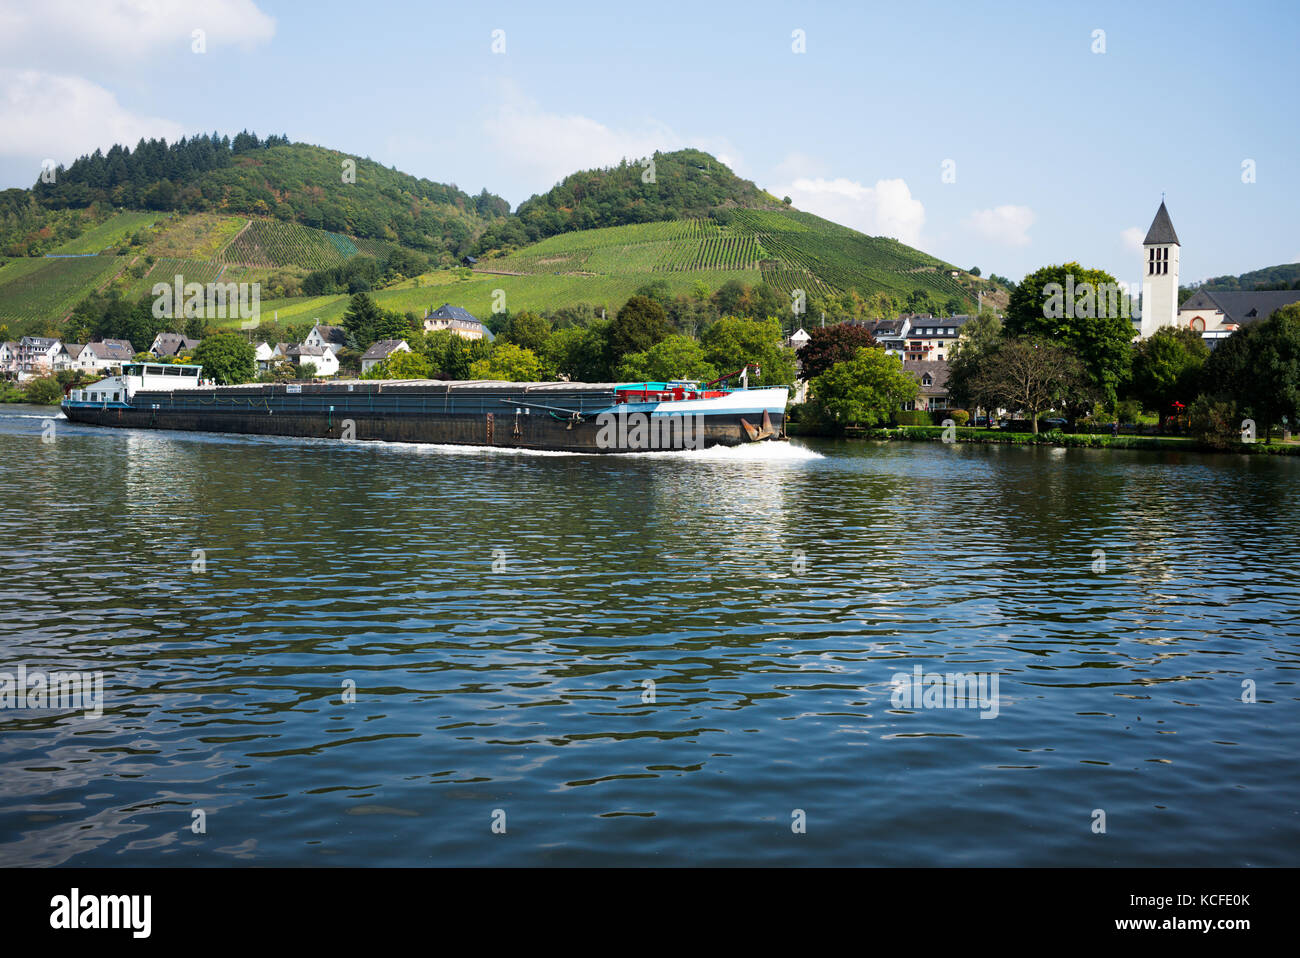 A barge passes the Village of Bullay on the river Moselle, Germany Stock Photo